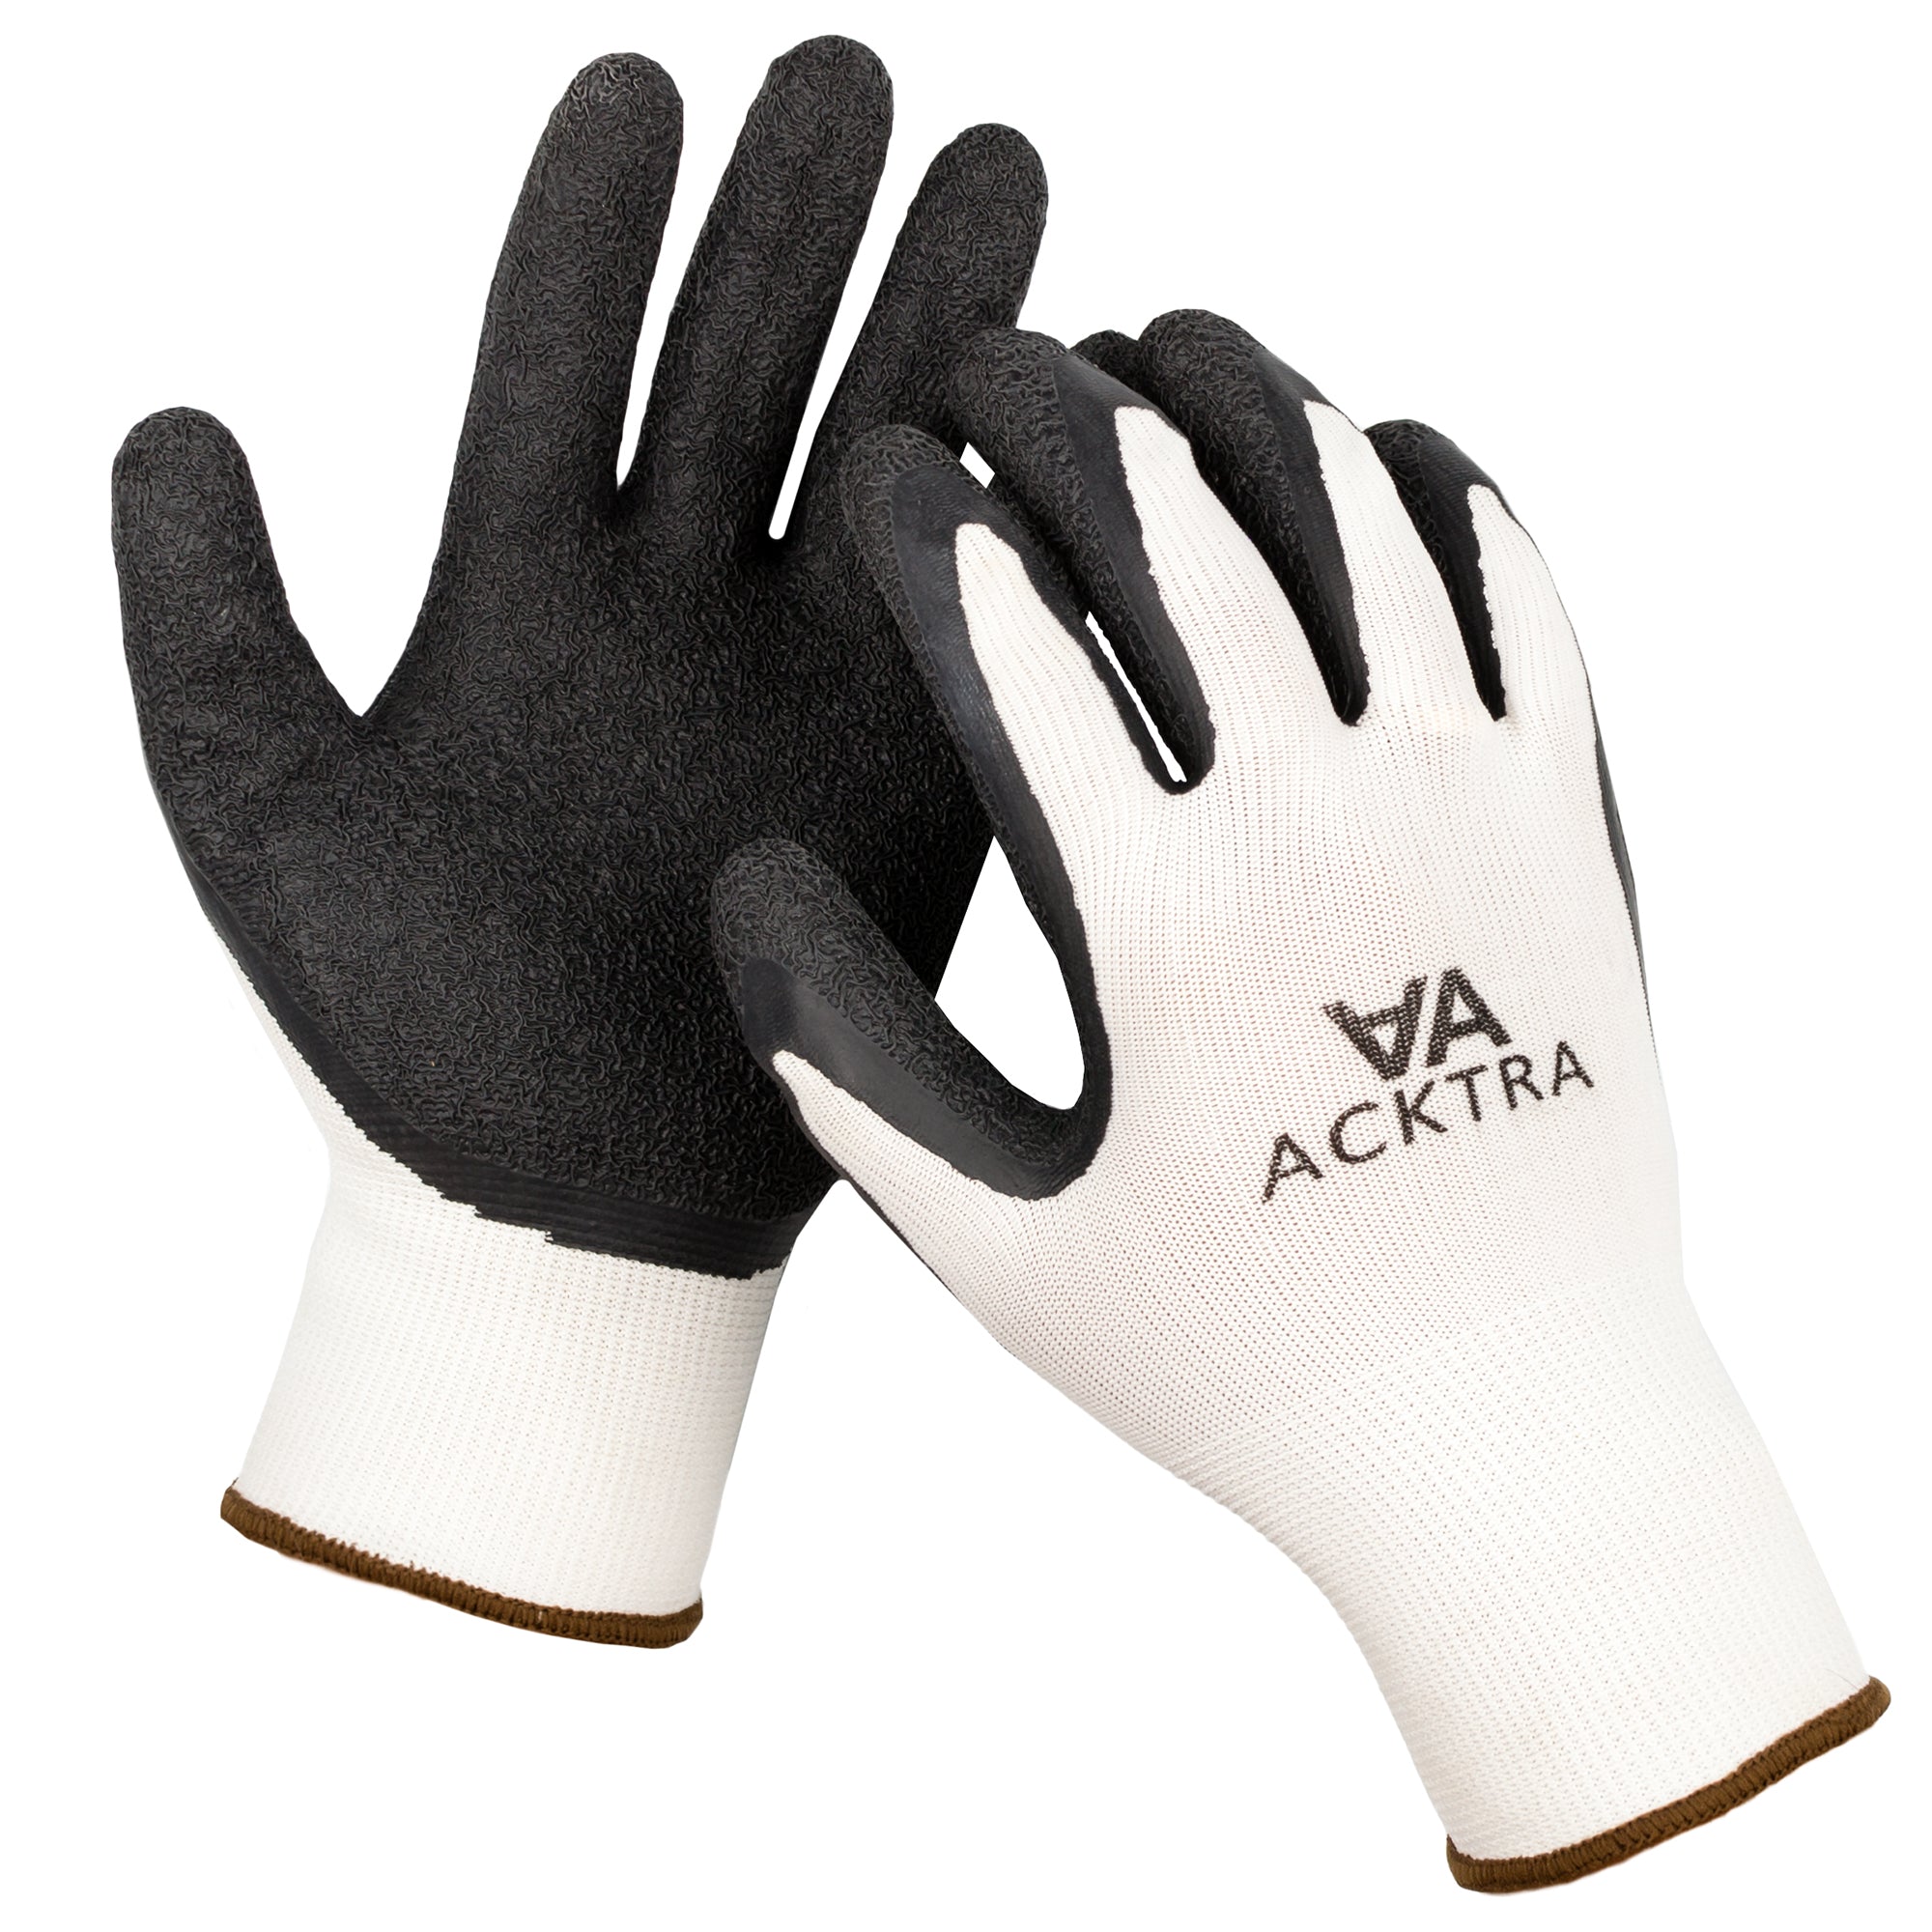 ATG Size XL (10) Nitrile Coated Nylon General Protection Work Gloves For  General Purpose, Palm & Fingers Coated, Knit Wrist Cuff, Full Fingered,  Gray/White, Paired 34-800/XL - 87310009 - Penn Tool Co., Inc